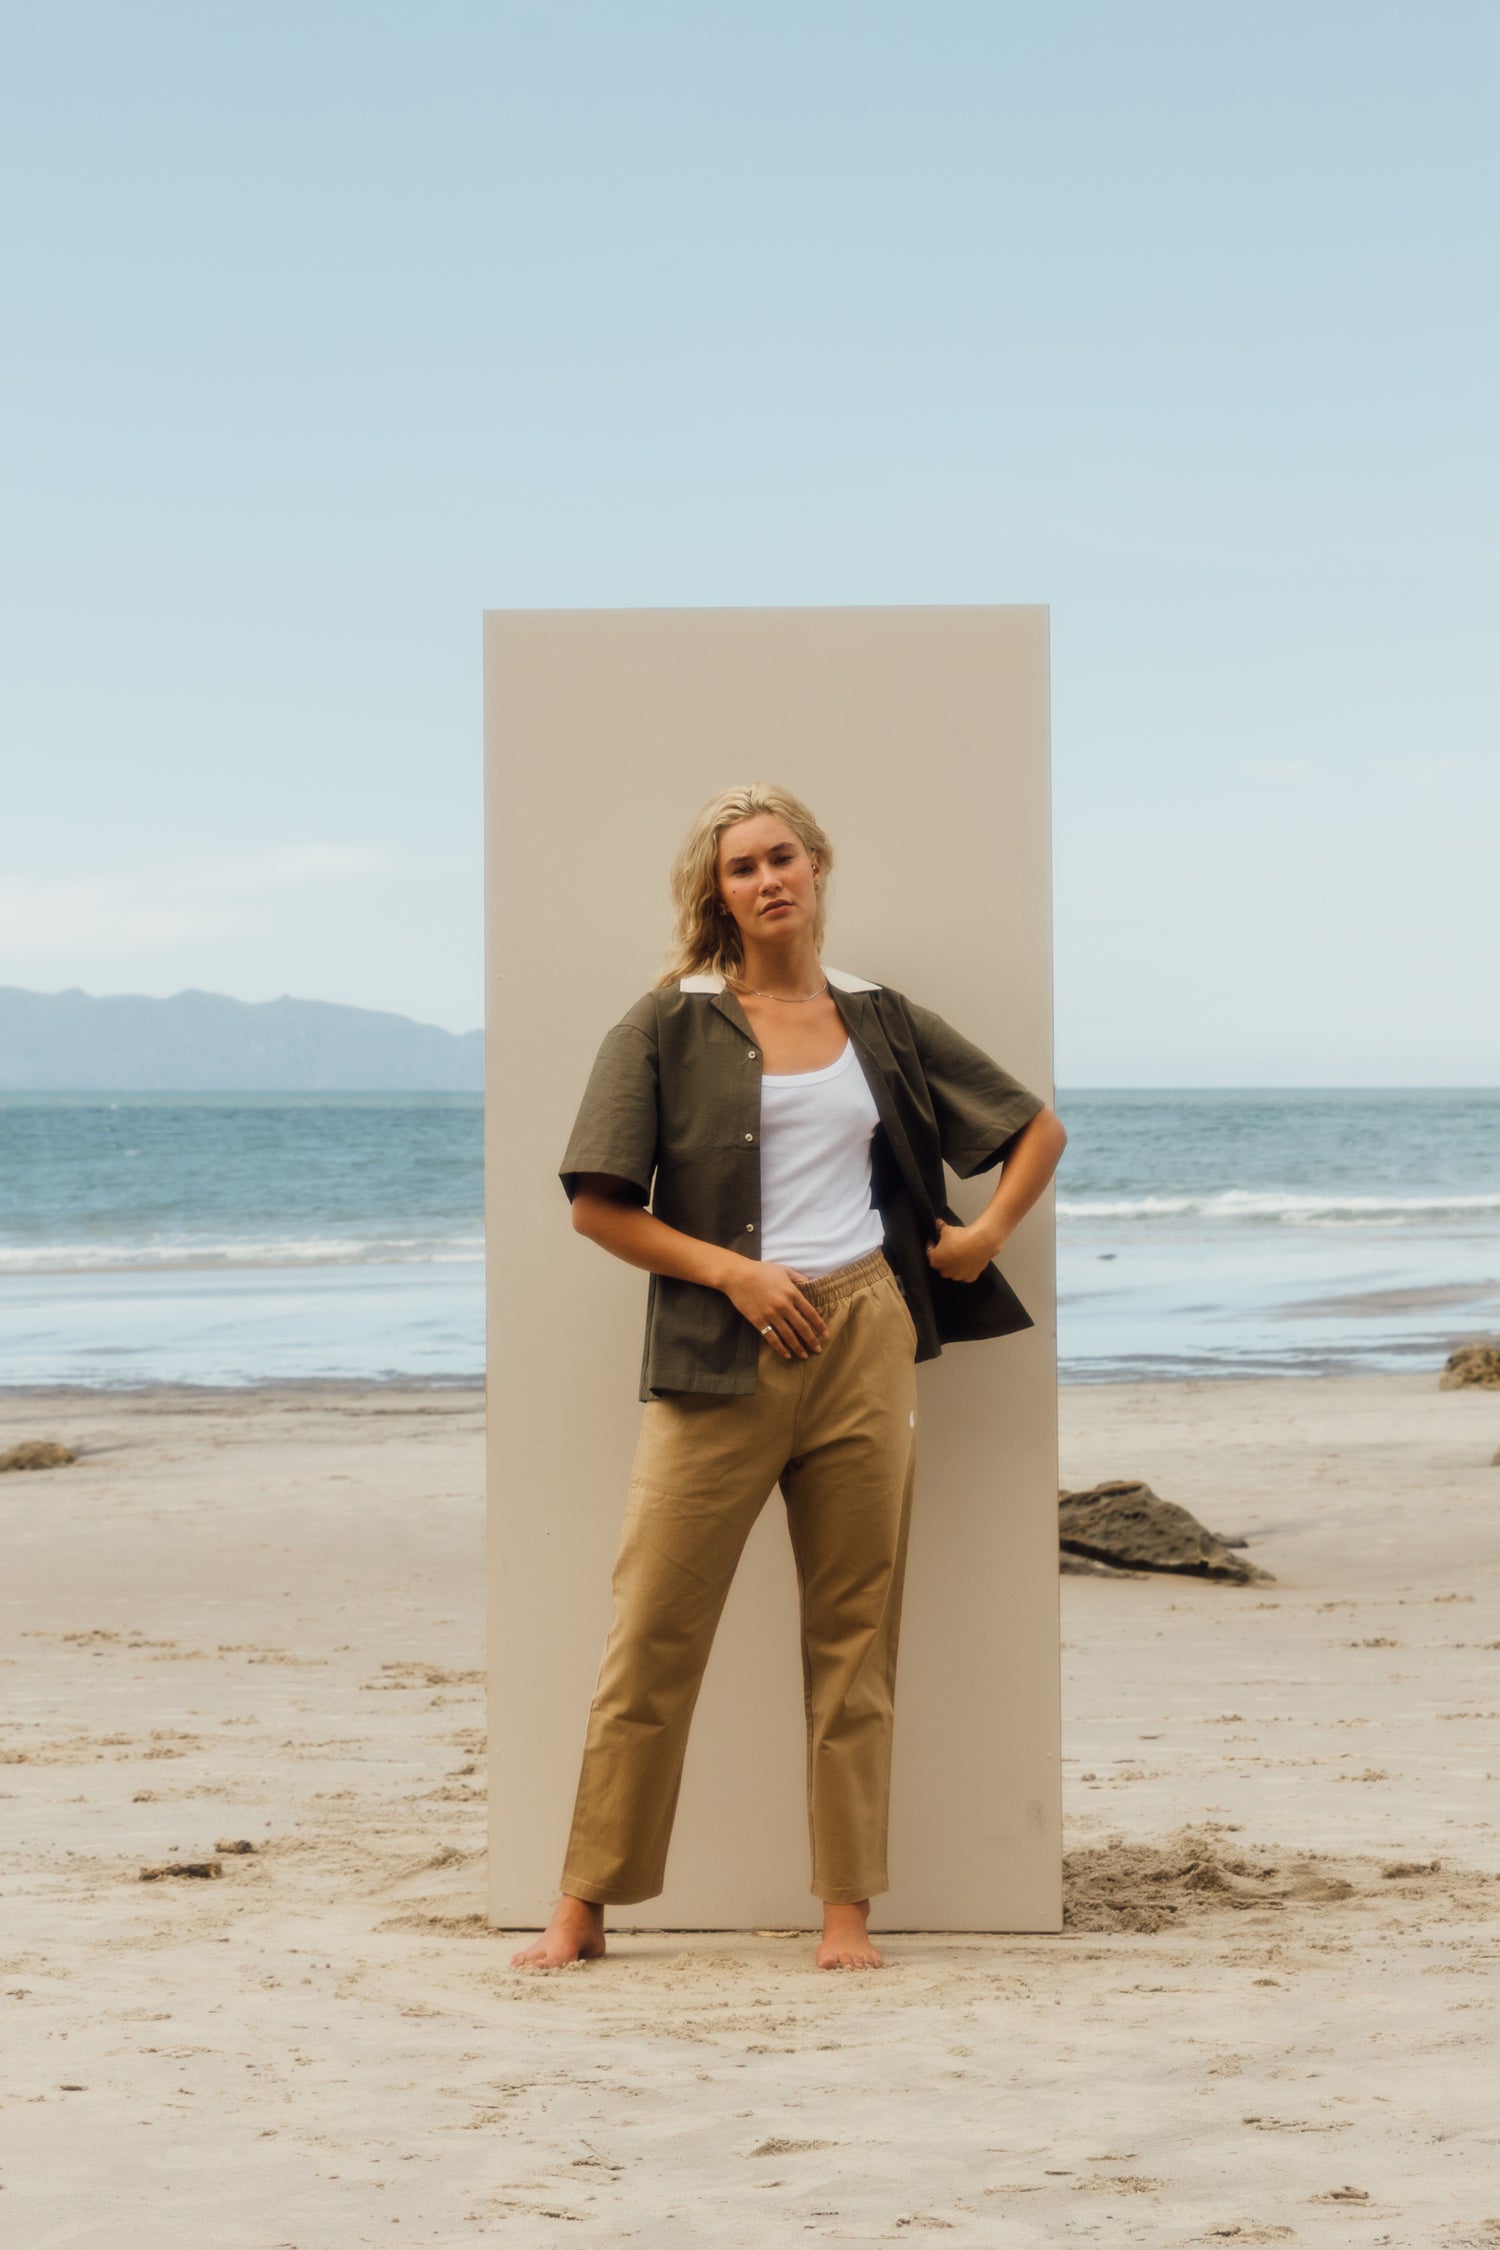 girl standing on beach in front of beige board wearing khaki shirt, white singlet, and beige pants